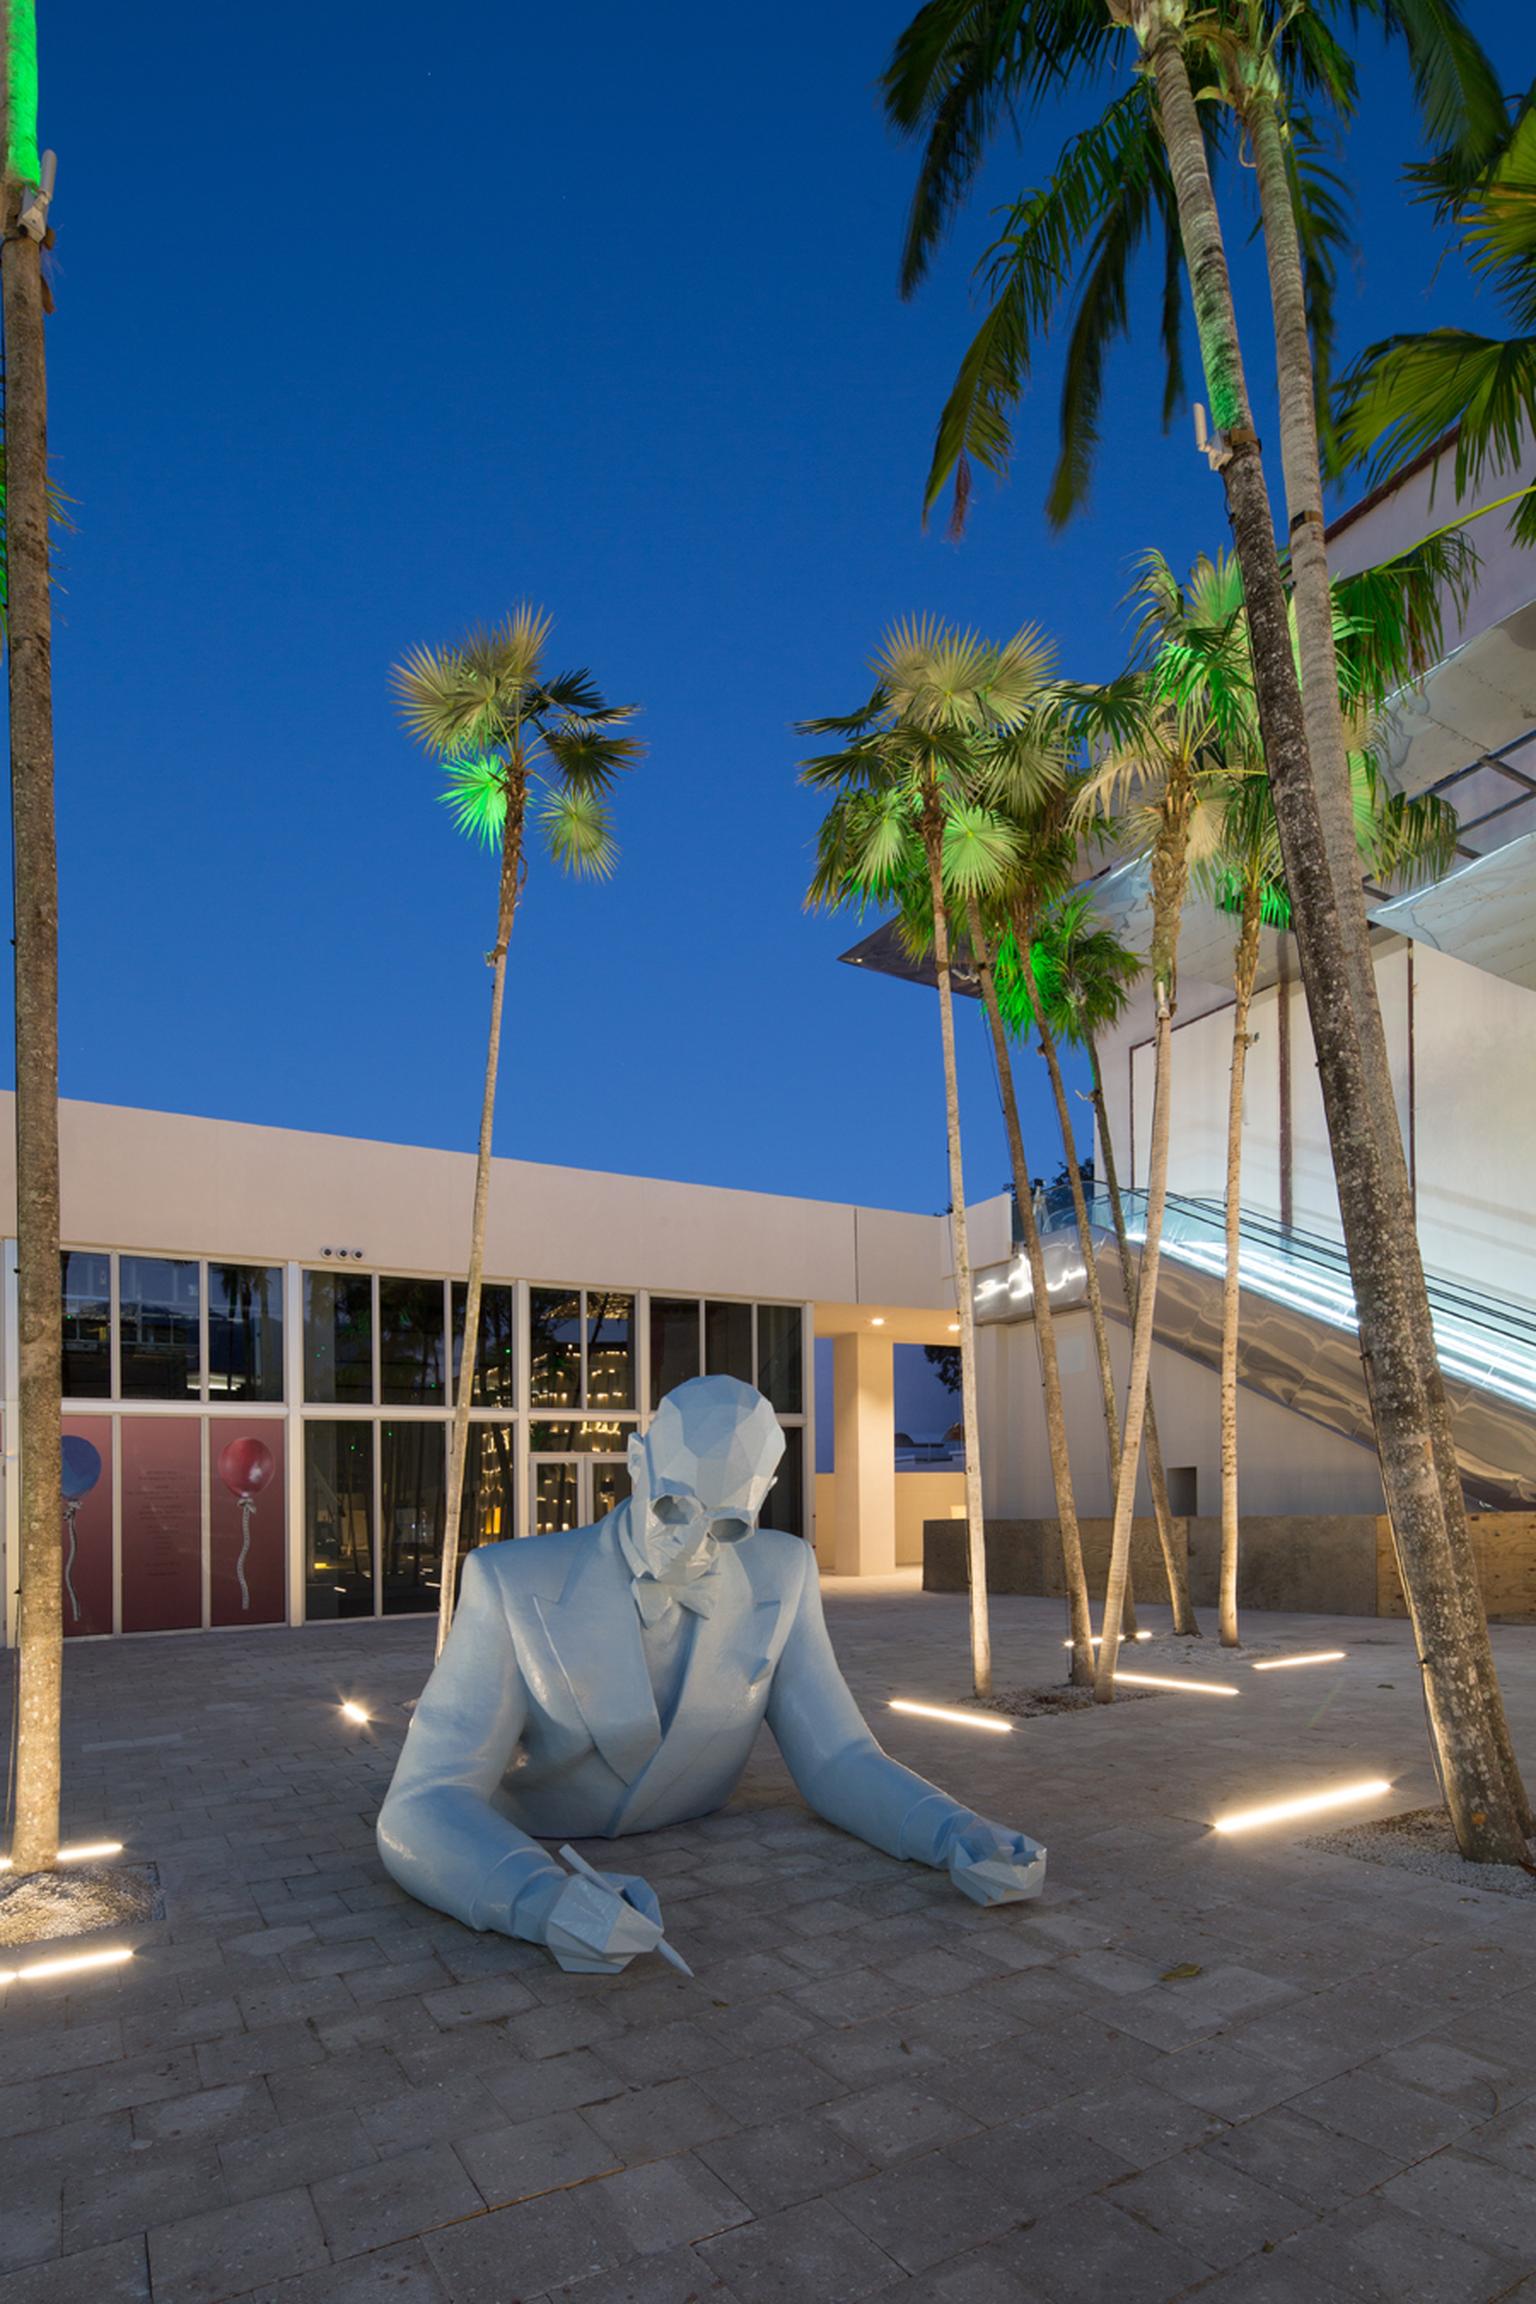 French artist Xavier Veilhan created this fiberglass sculpture of architect Le Corbusier, which overlooks the Buckminster Fuller Fly's Eye Dome in the Miami Design District.